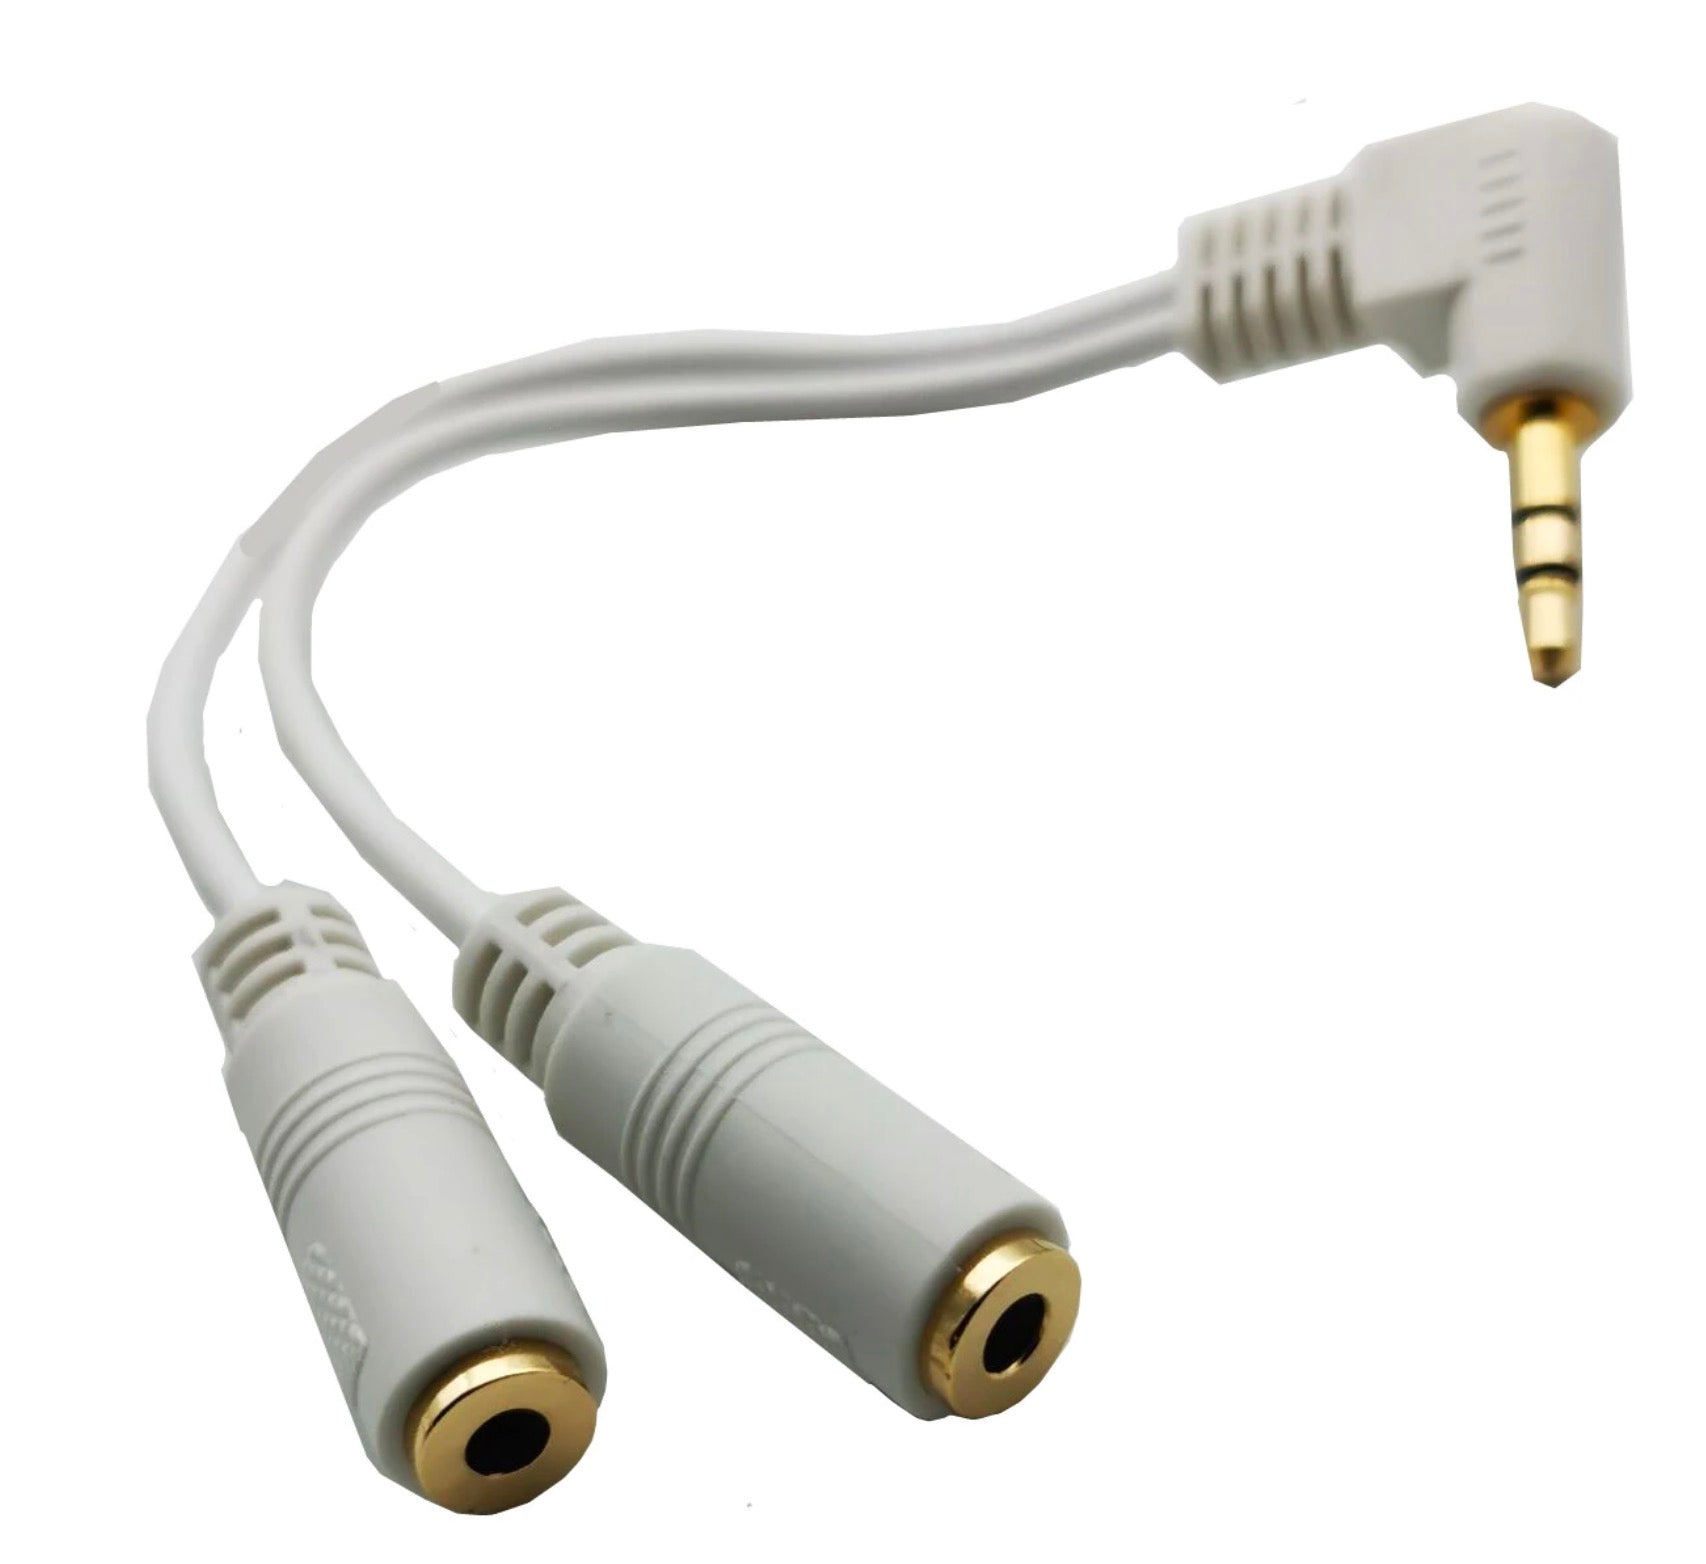 3.5mm 3 Pole Male to Dual 3.5mm Female Headphone Audio Splitter Cable 0.15m